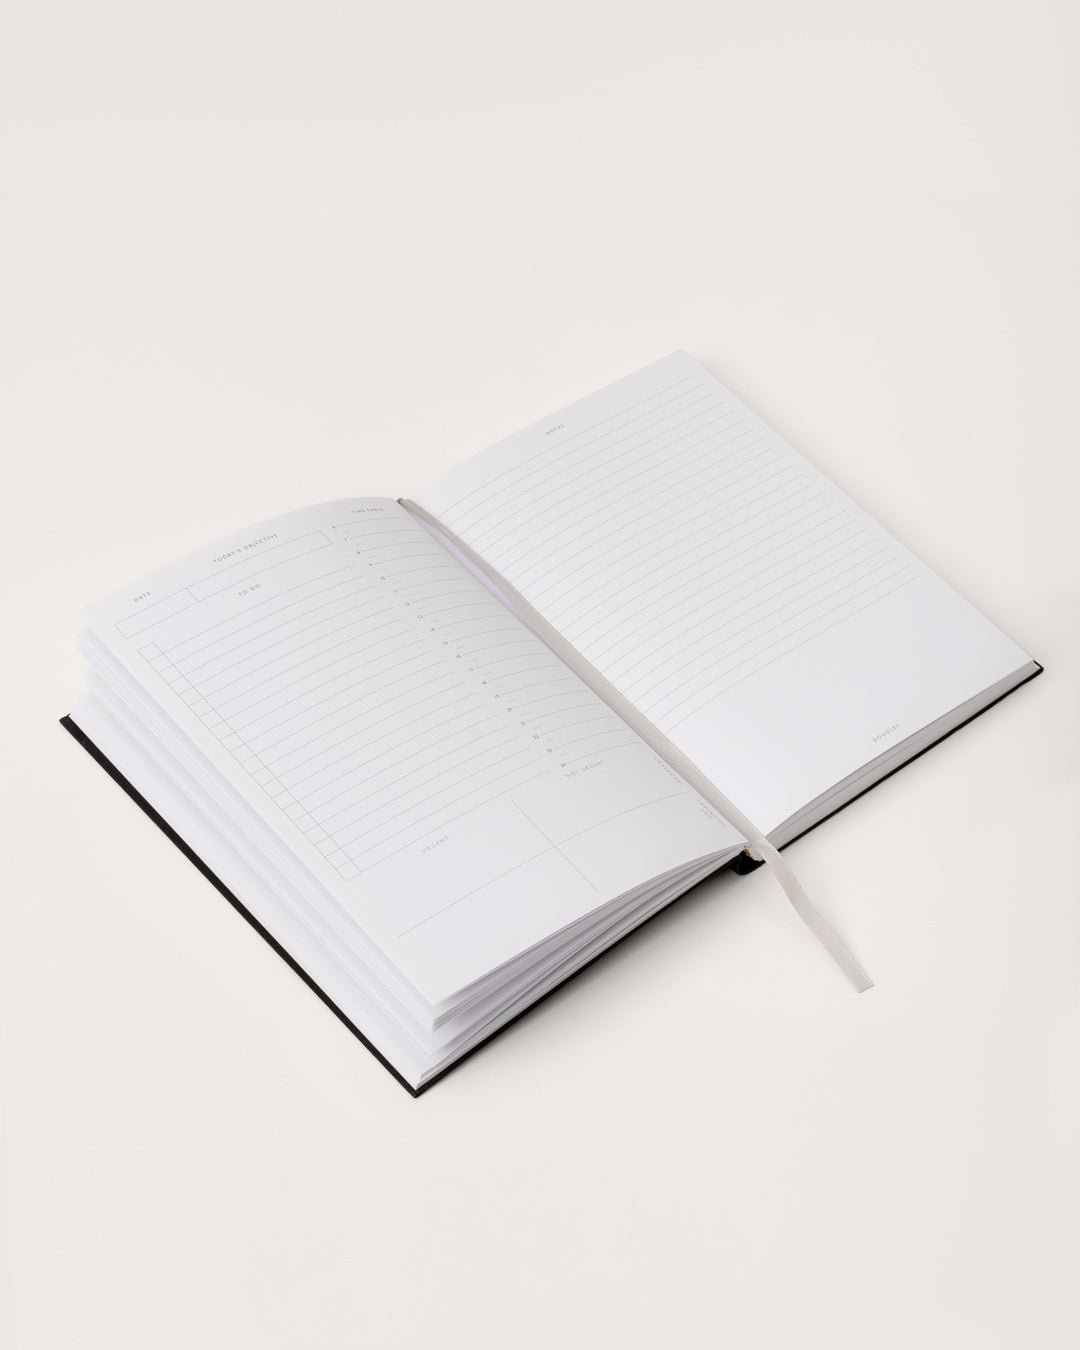 An image of the inside spread of a planner and the ribbon page marker.